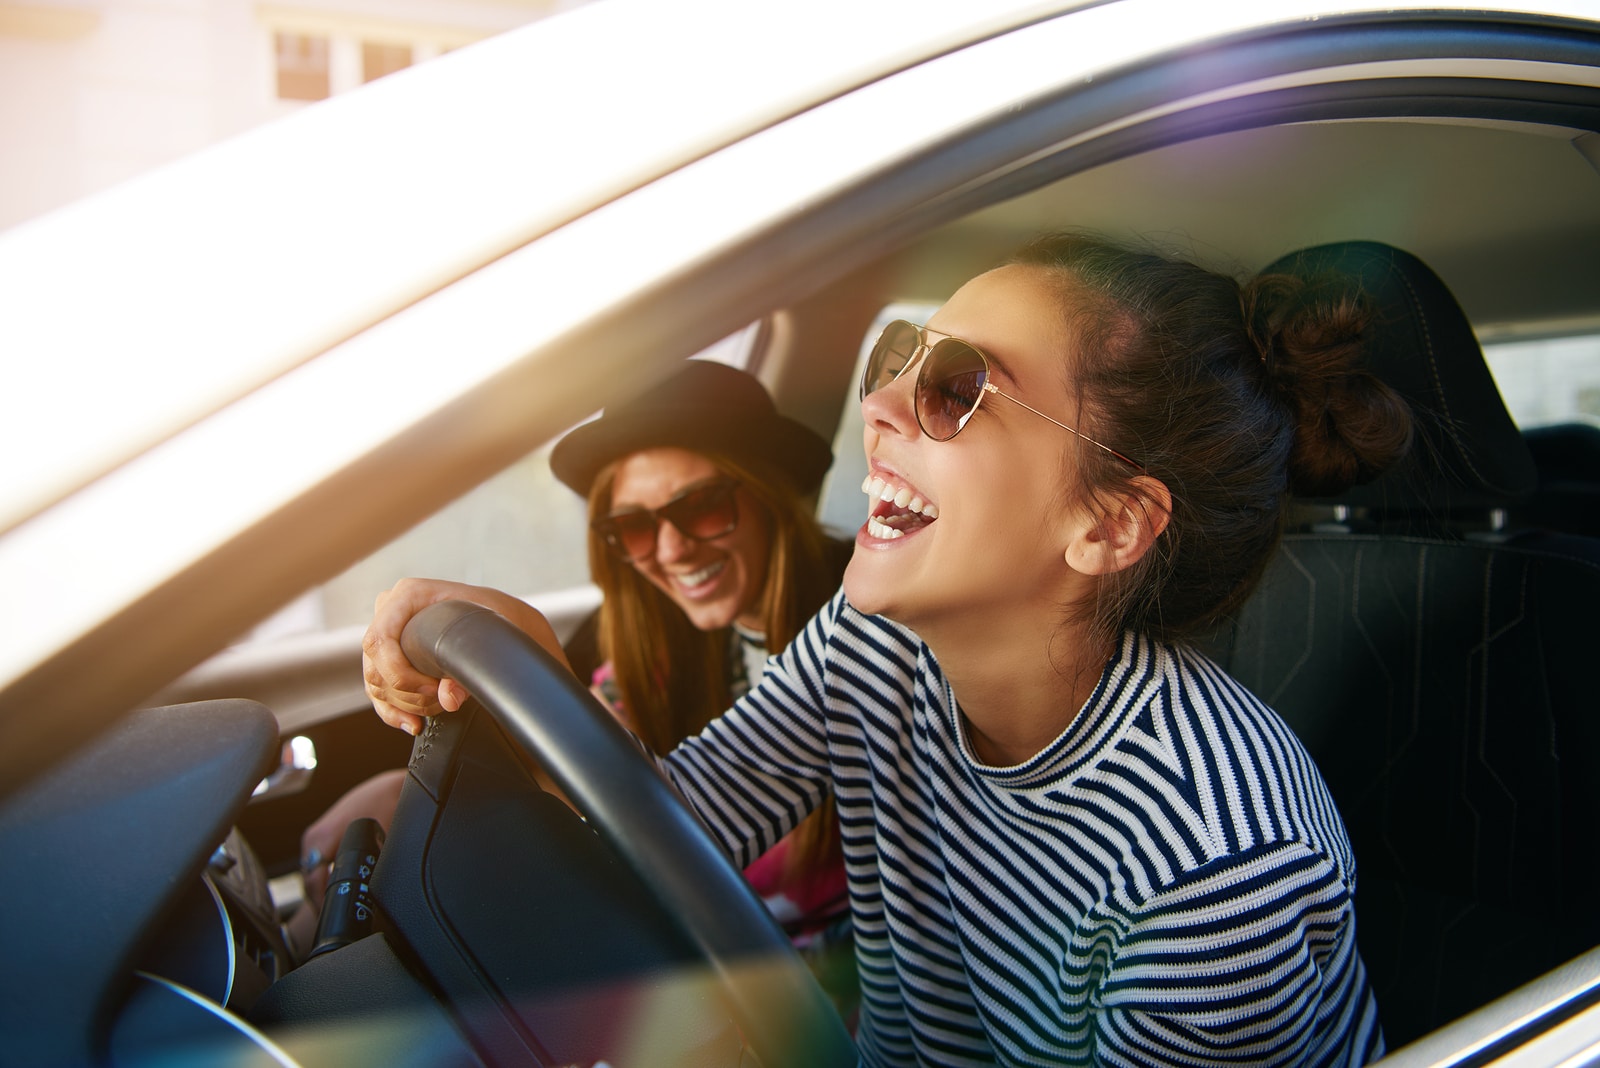 Laughing young woman wearing sunglasses driving a car with her girl friend close up profile view through the open window